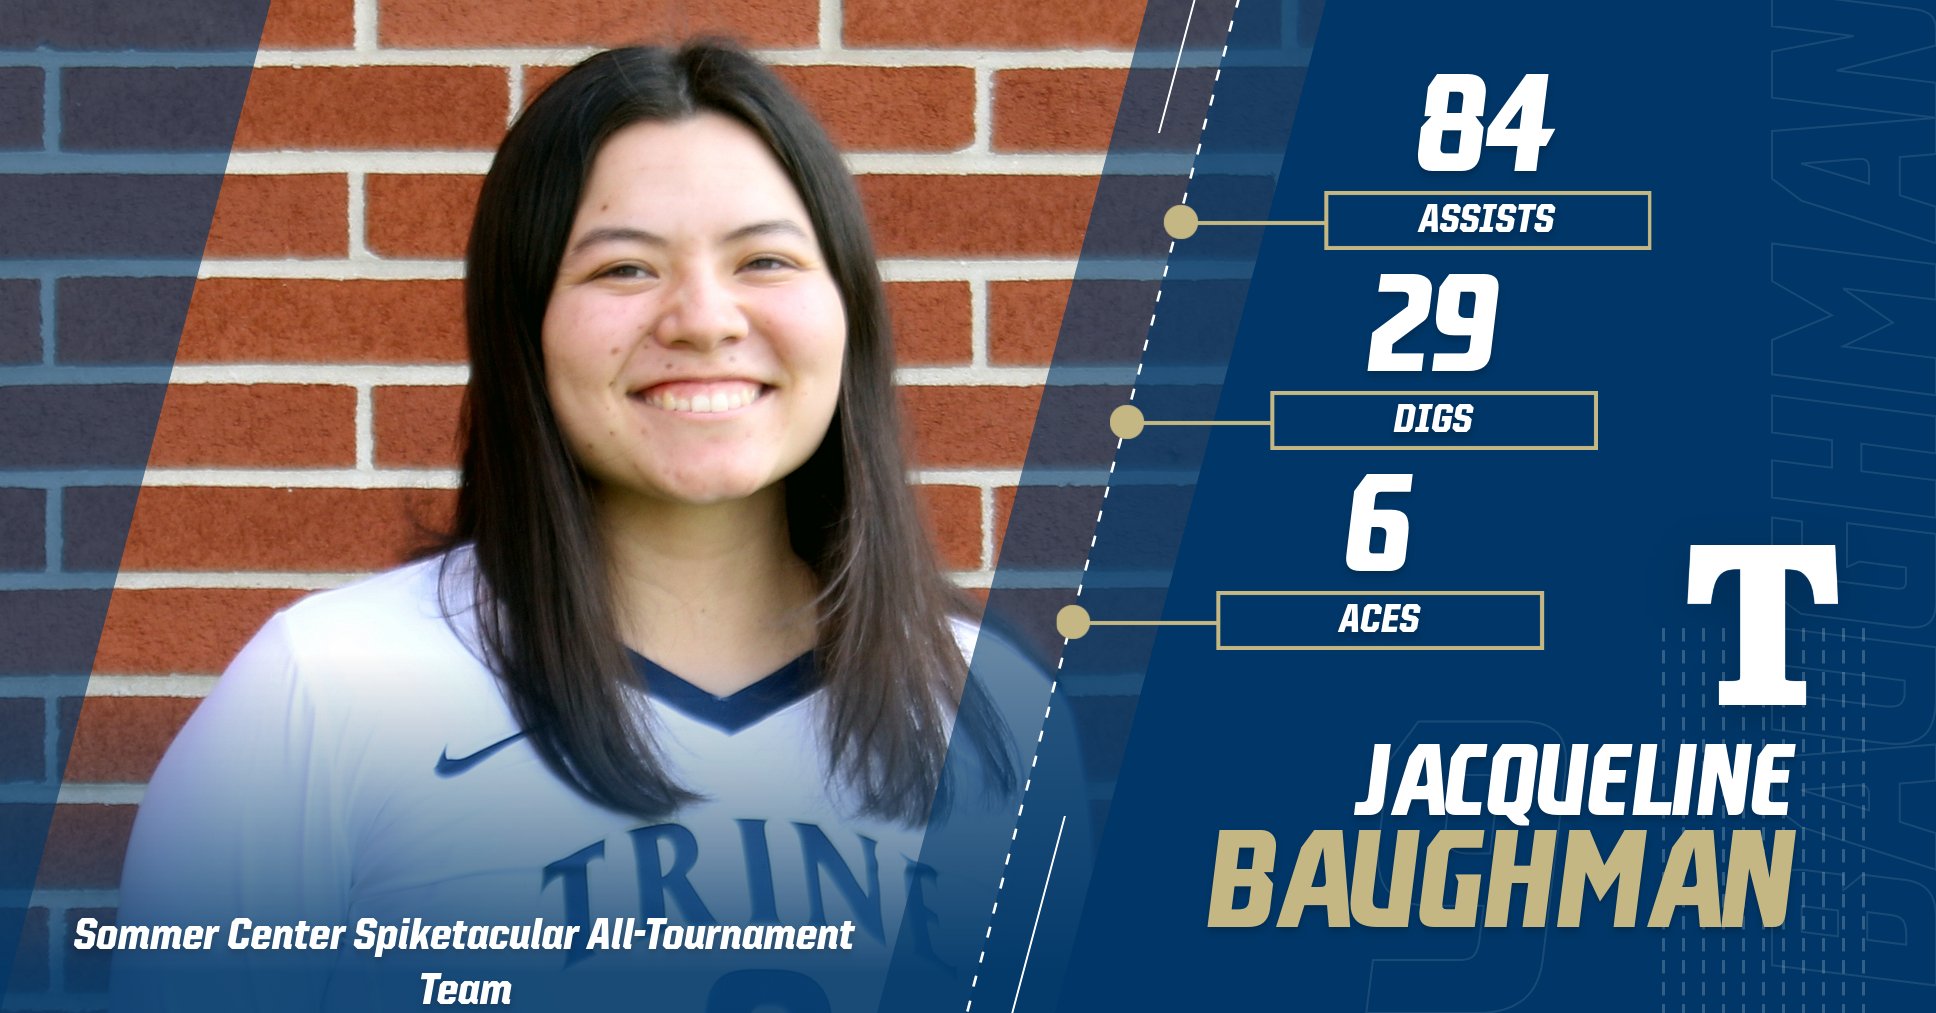 Thunder Win First Match of 2021 Season; Baughman Named to All-Tournament Team in Bluffton